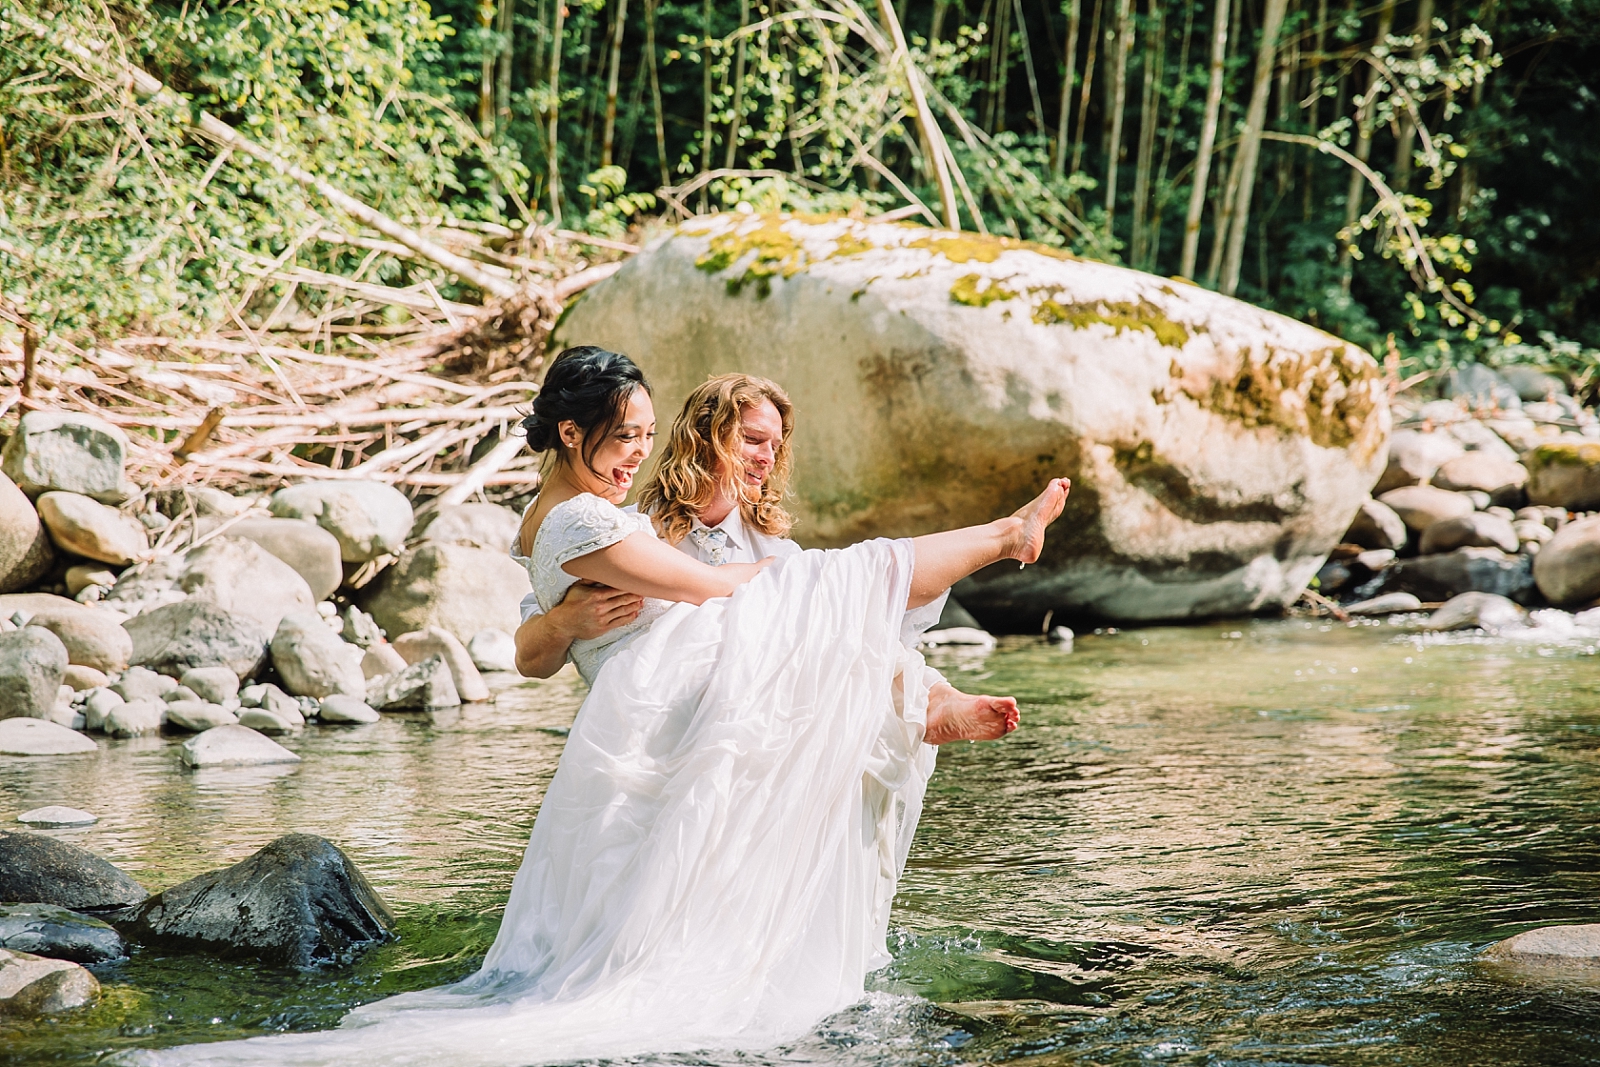 bride and groom in water river wedding clothes